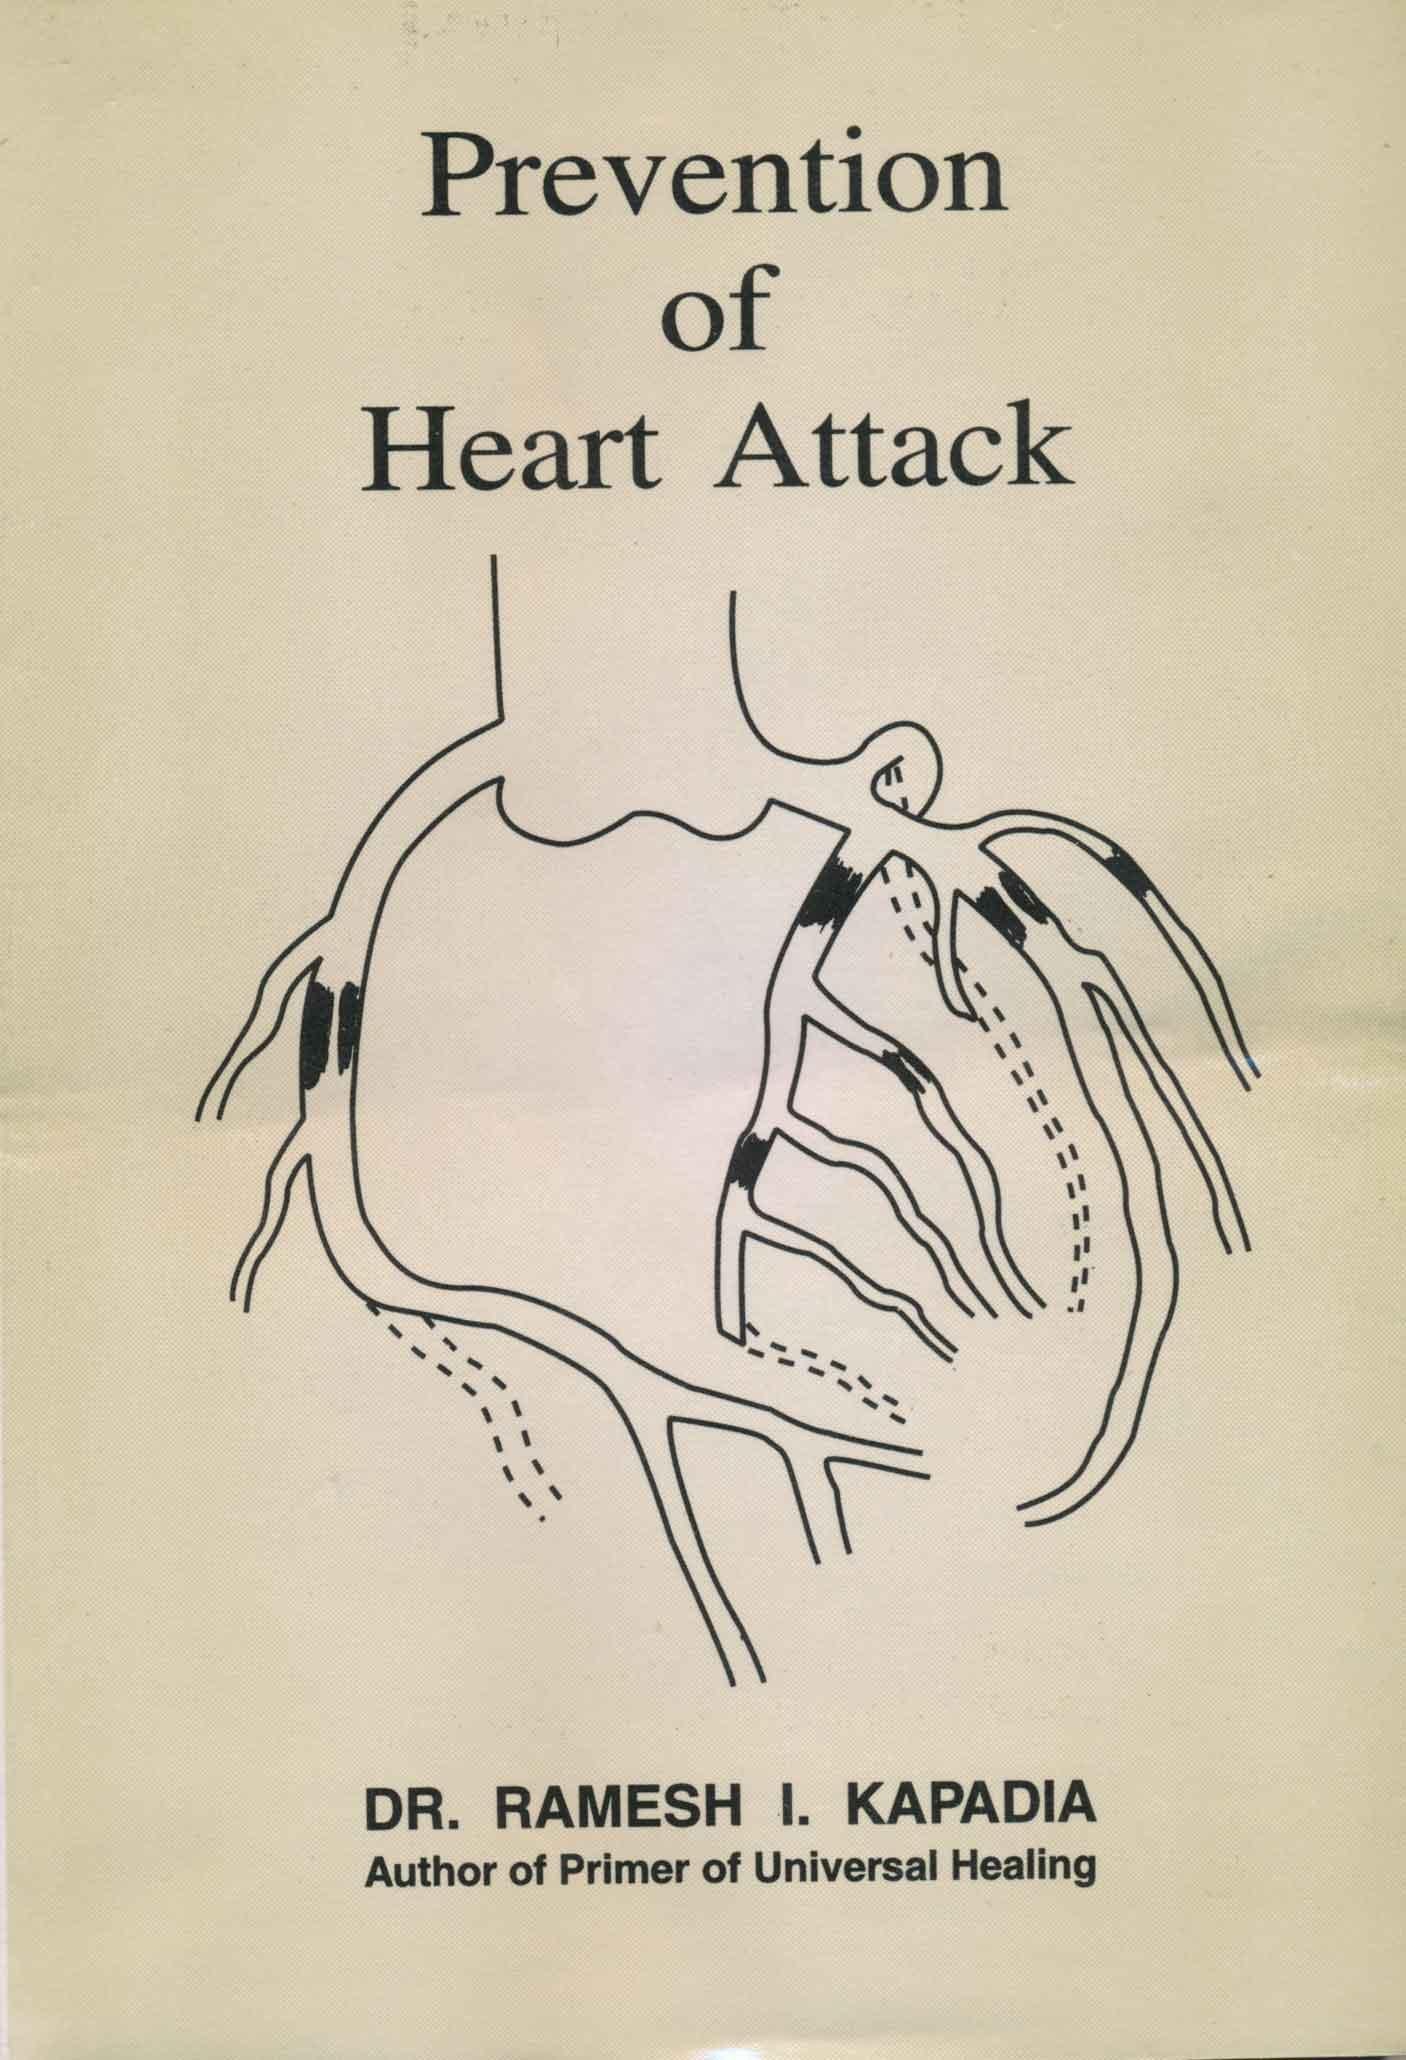 Prevention of Heart Attack